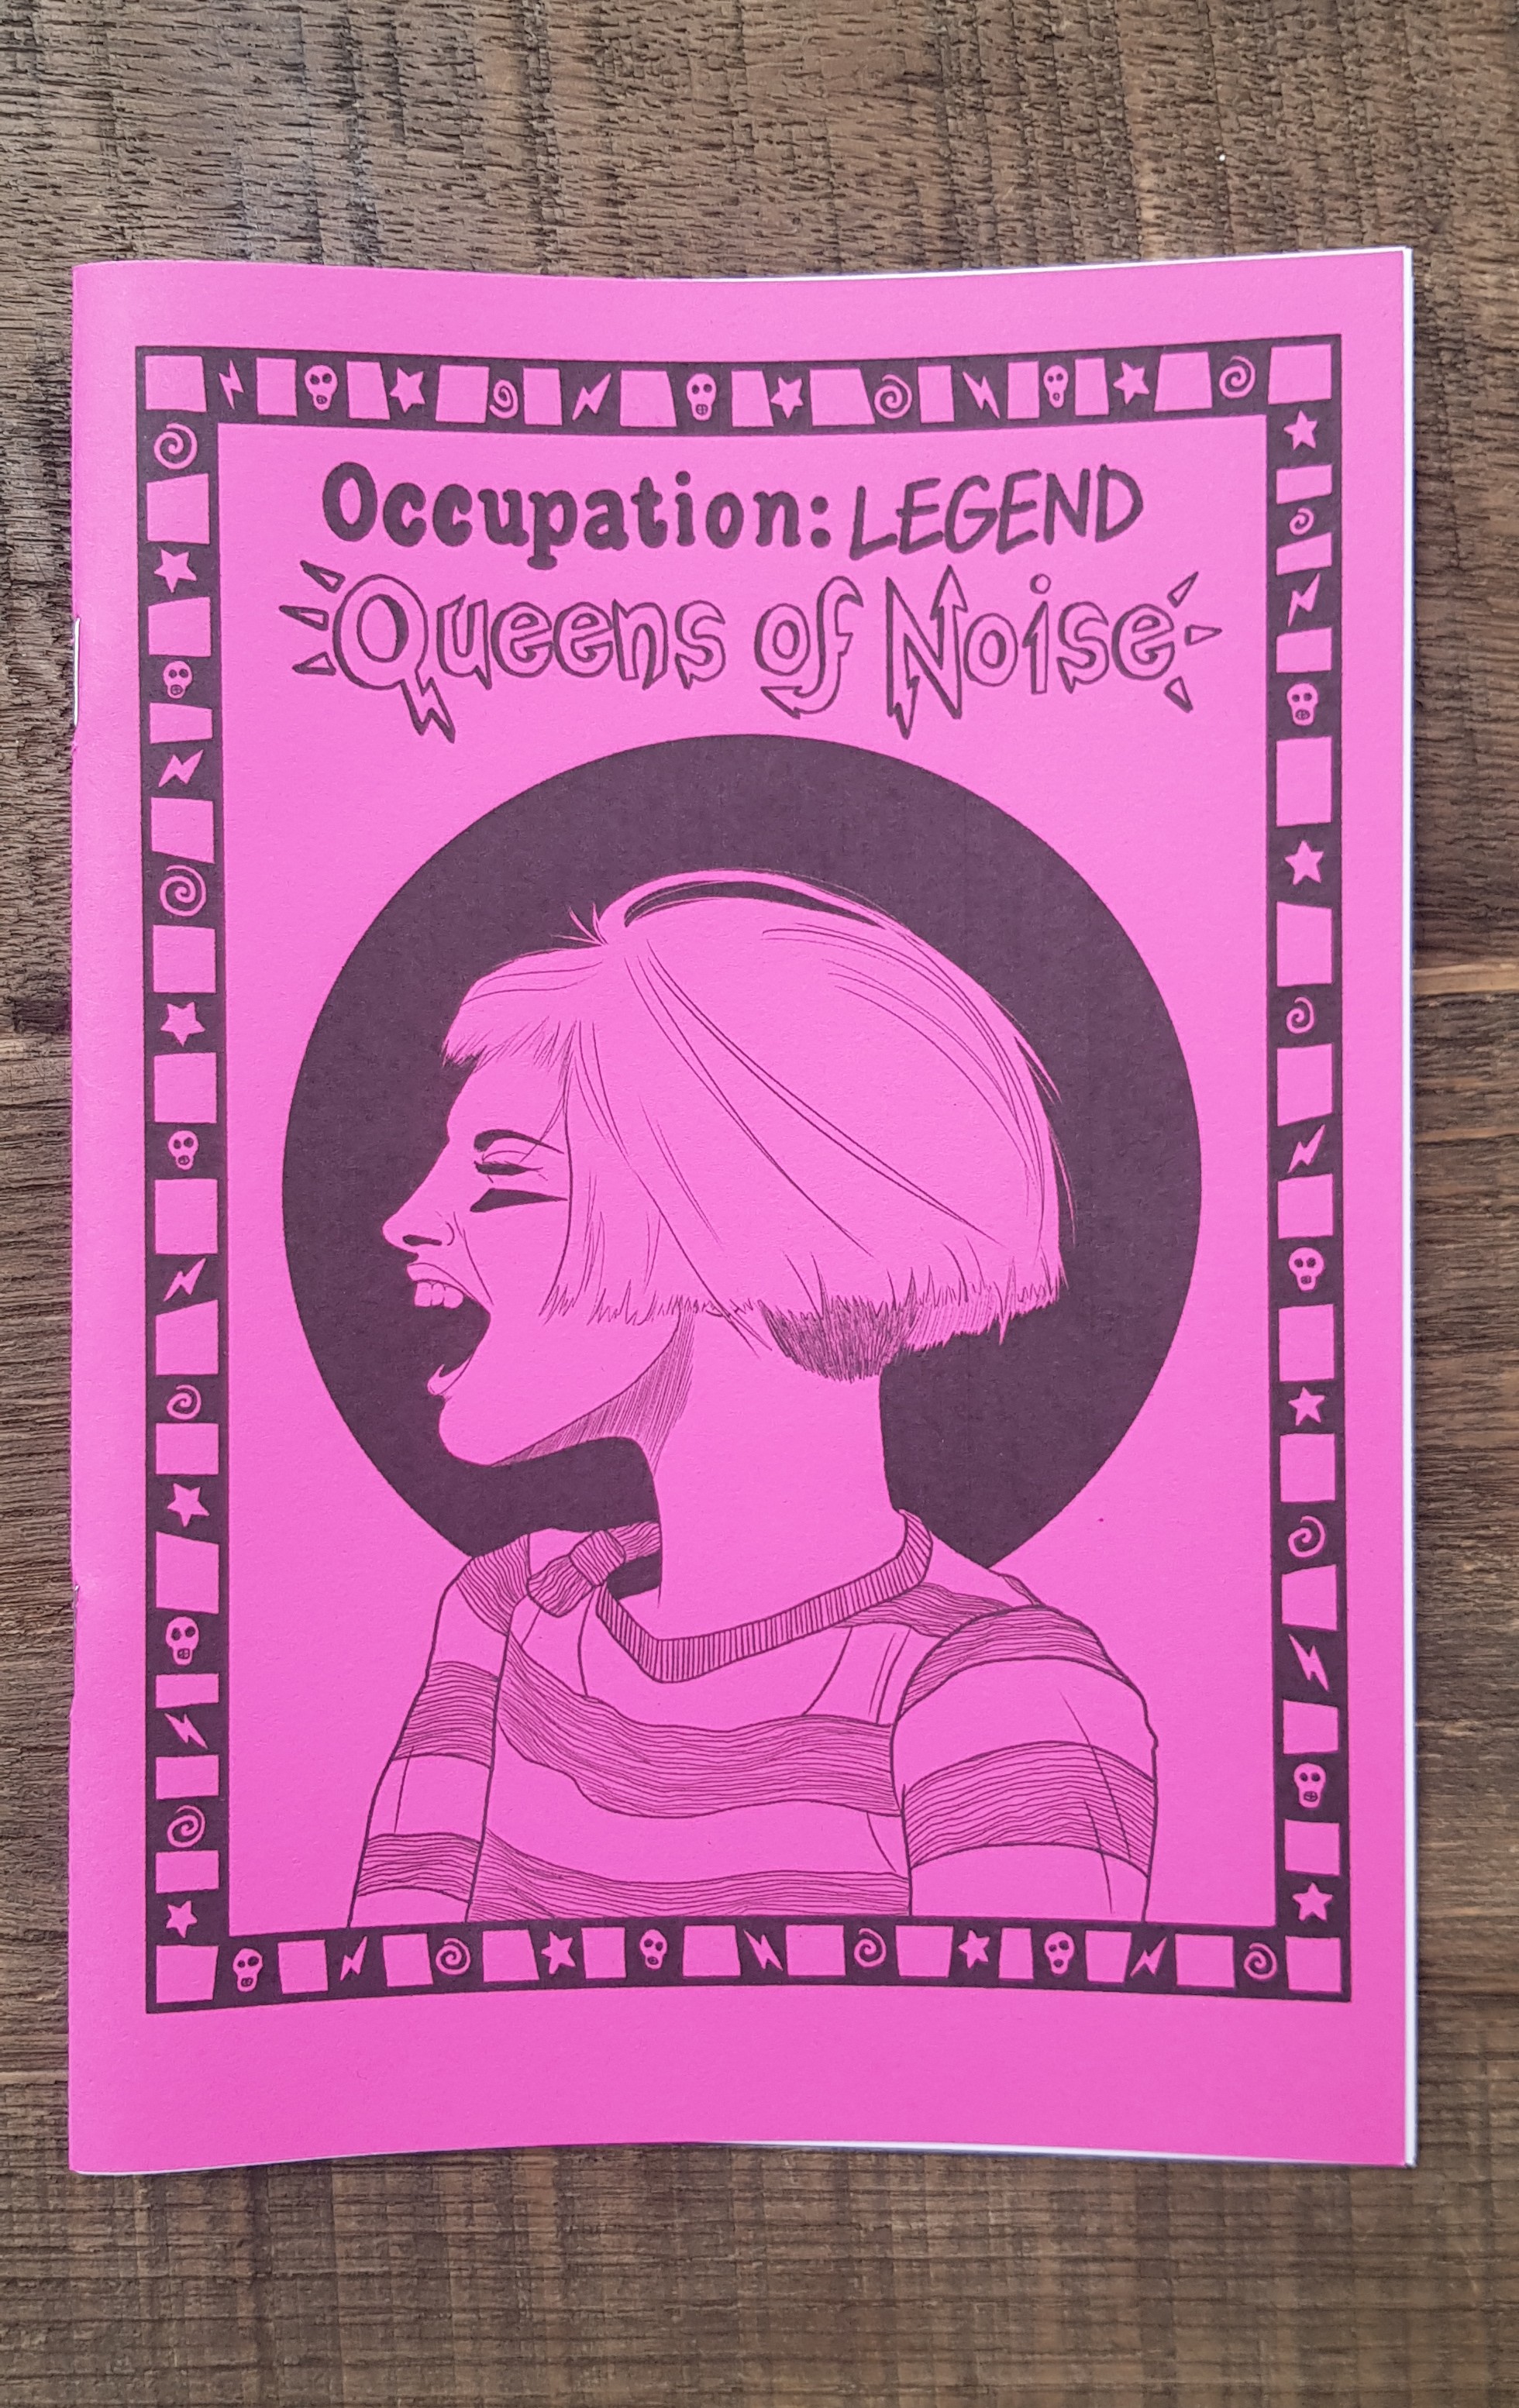 Occupation:Legend 2 - Queens of Noise